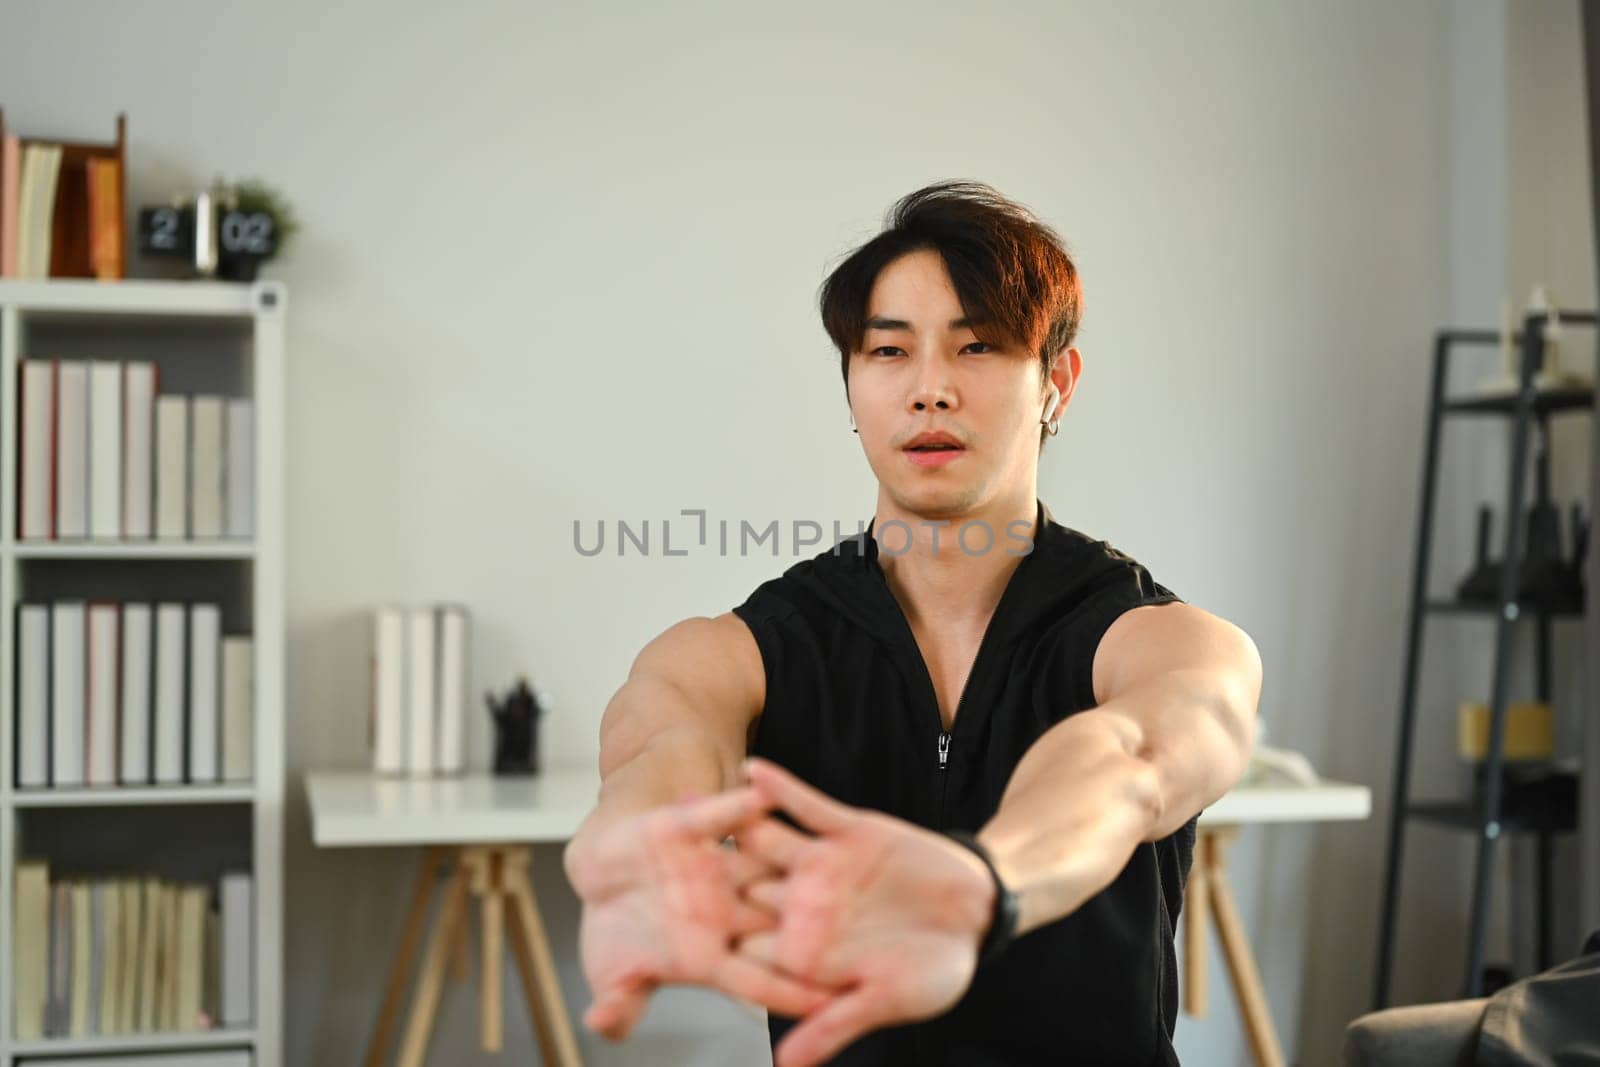 Athletic man in sportswear stretching arms before workout routine at home. Fitness, training and healthy lifestyle concept.